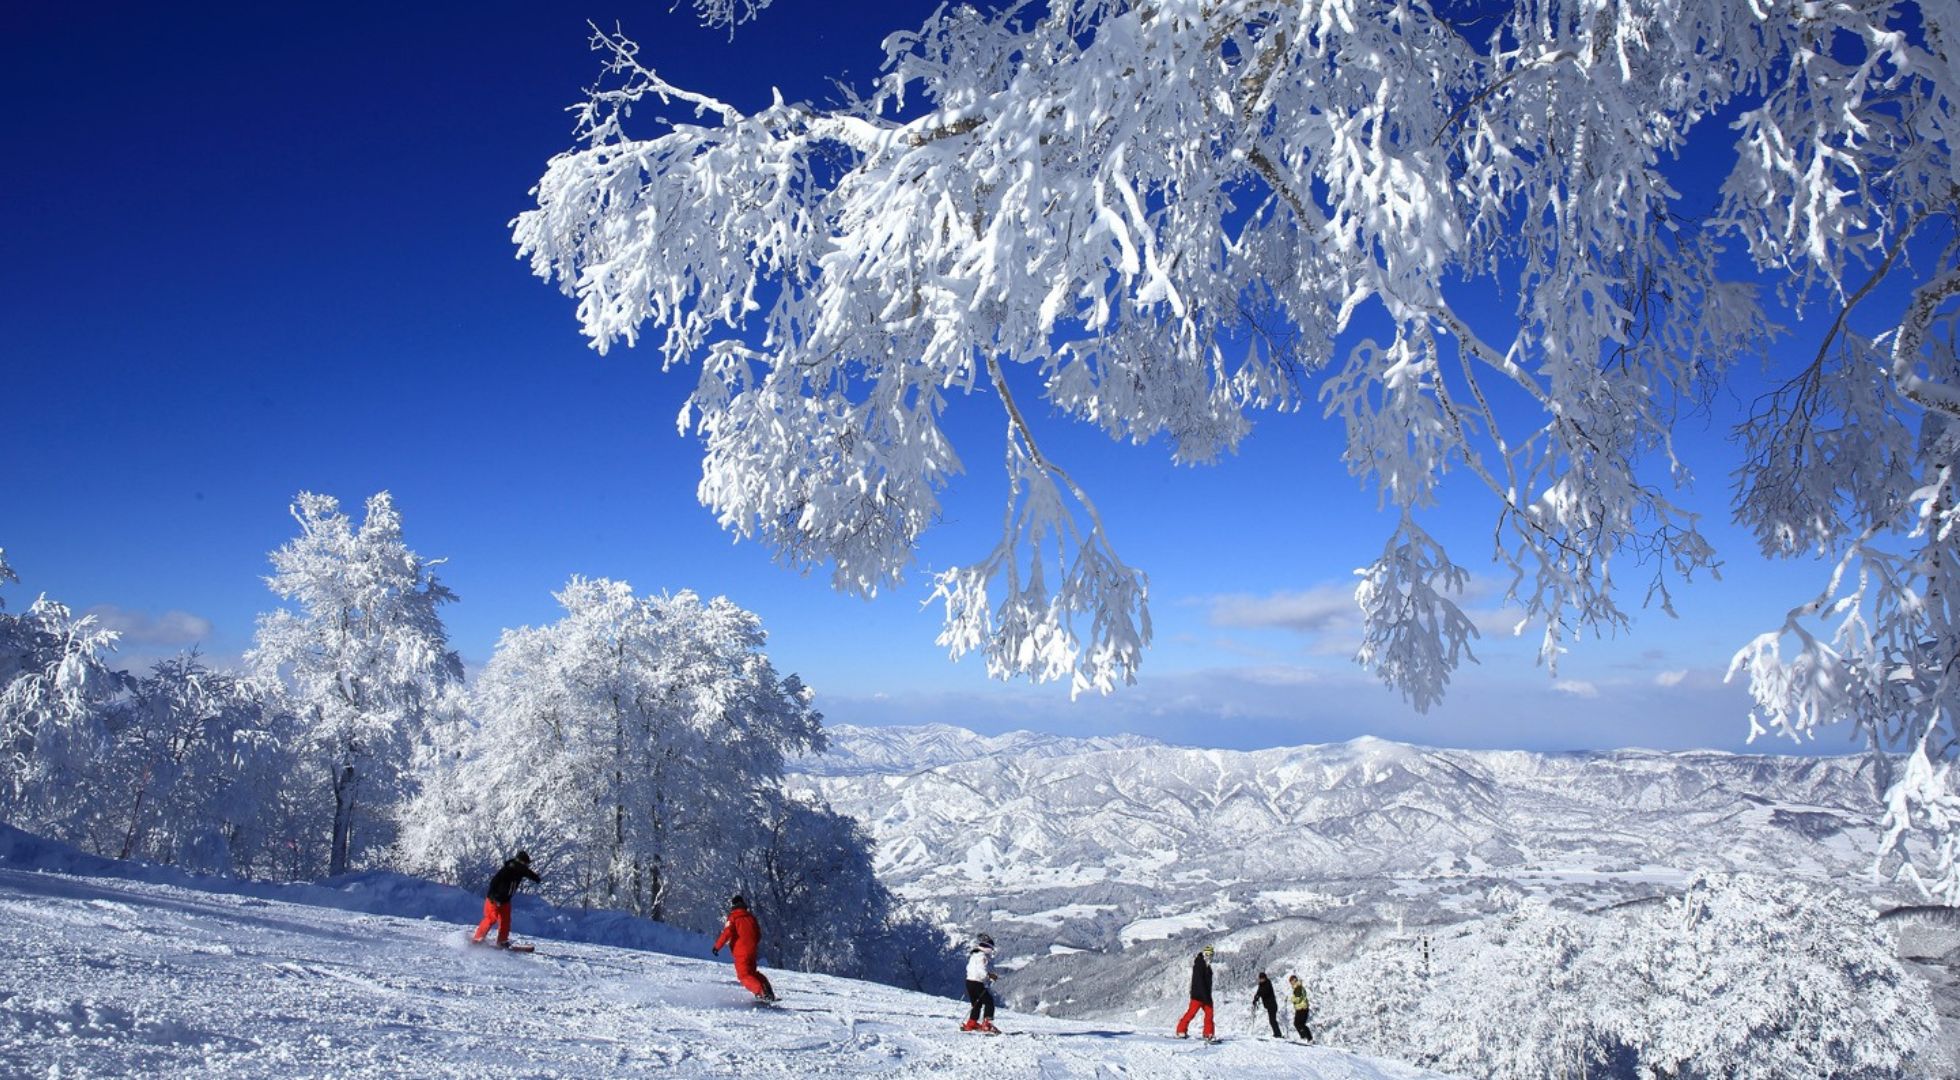 Japan skiing and snowboarding is a popular sport